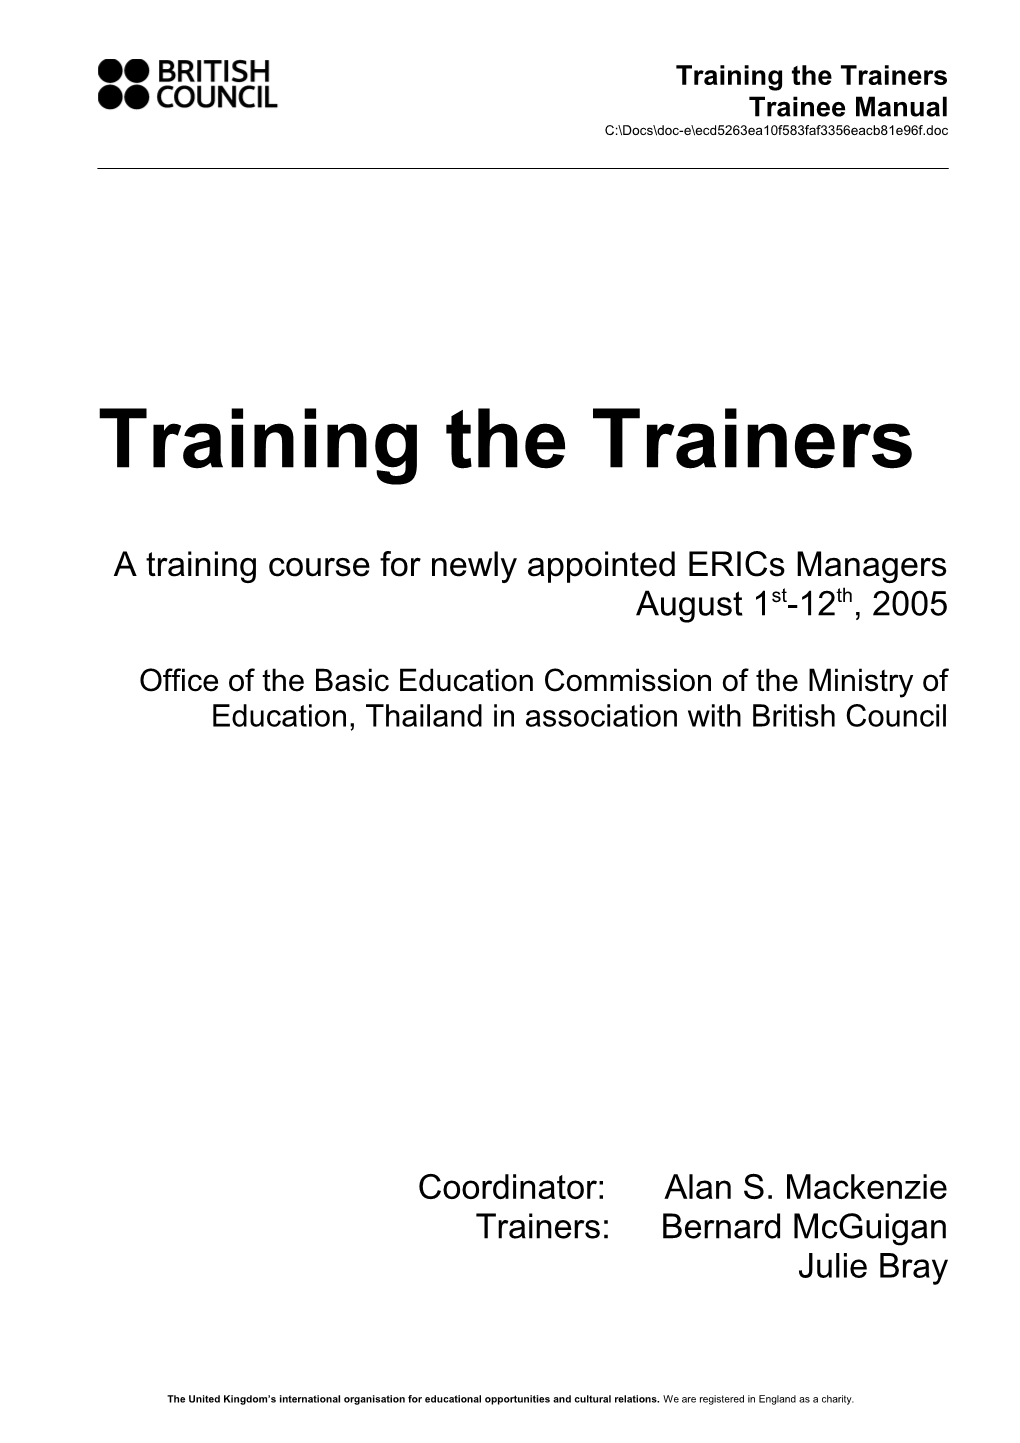 A Training Course for Newly Appointed Erics Managers